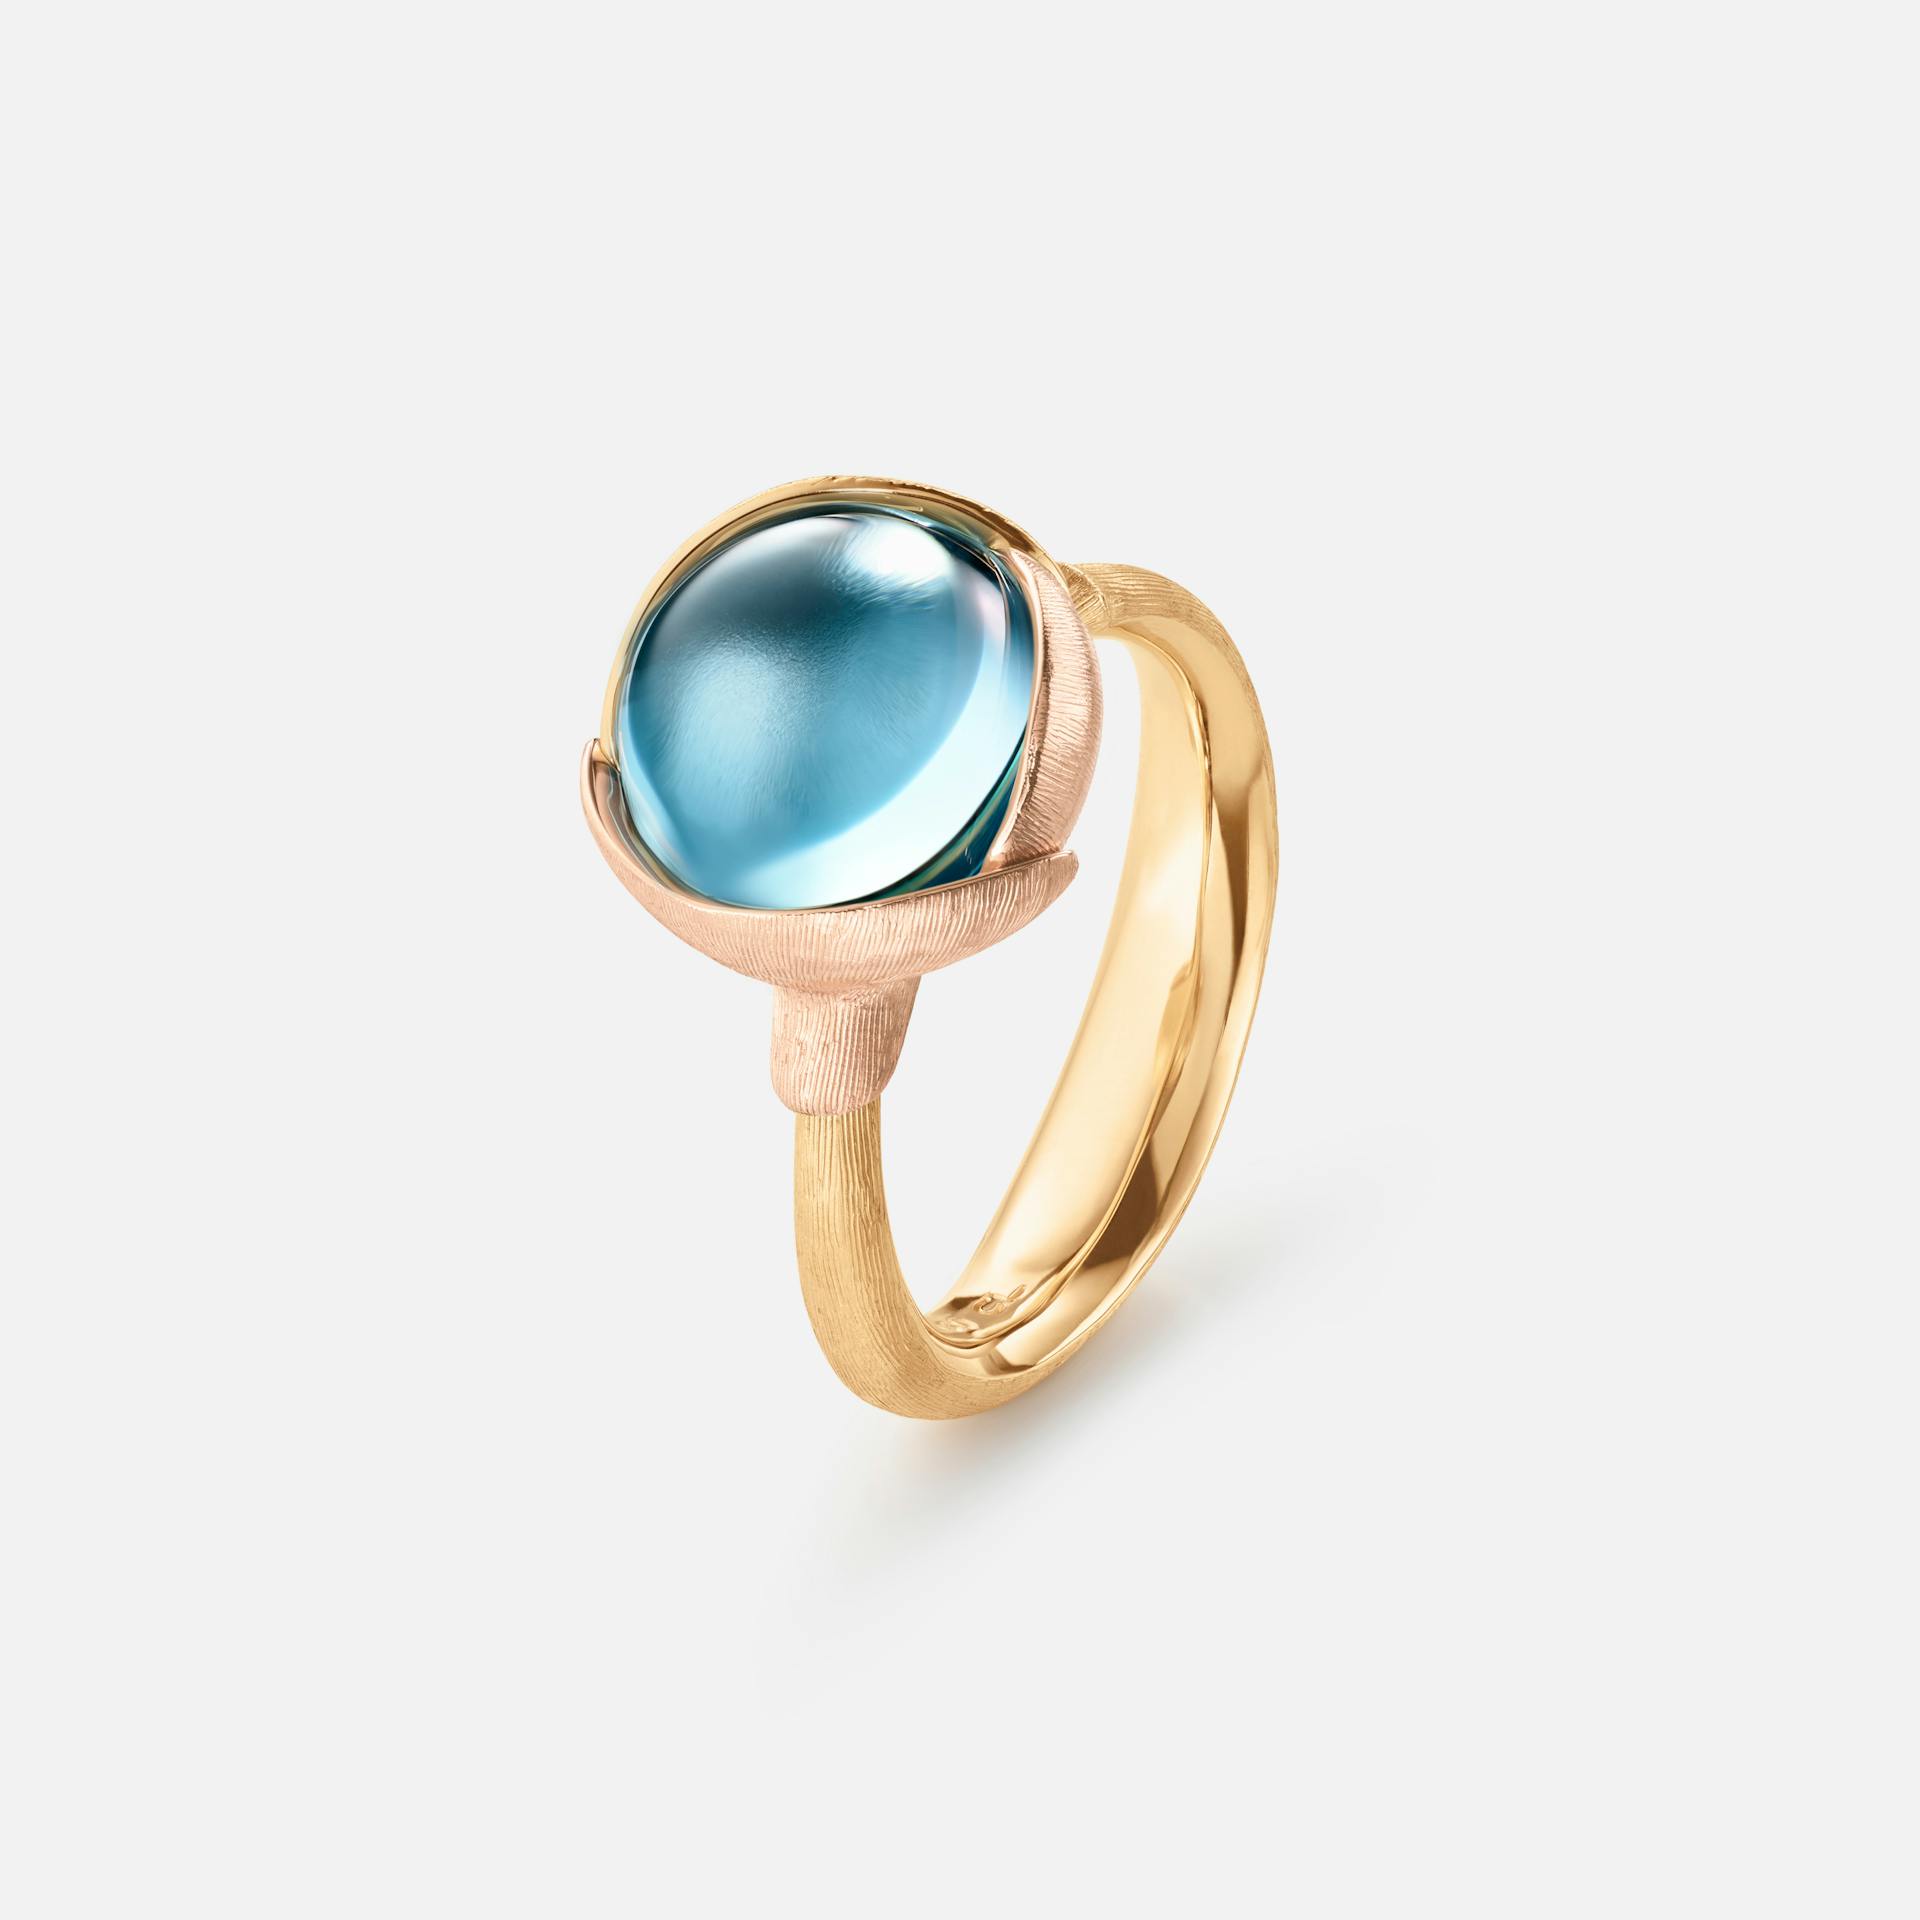 Lotus Ring size 2 in Yellow and Rose Gold  with Blue Topaz  |  Ole Lynggaard Copenhagen